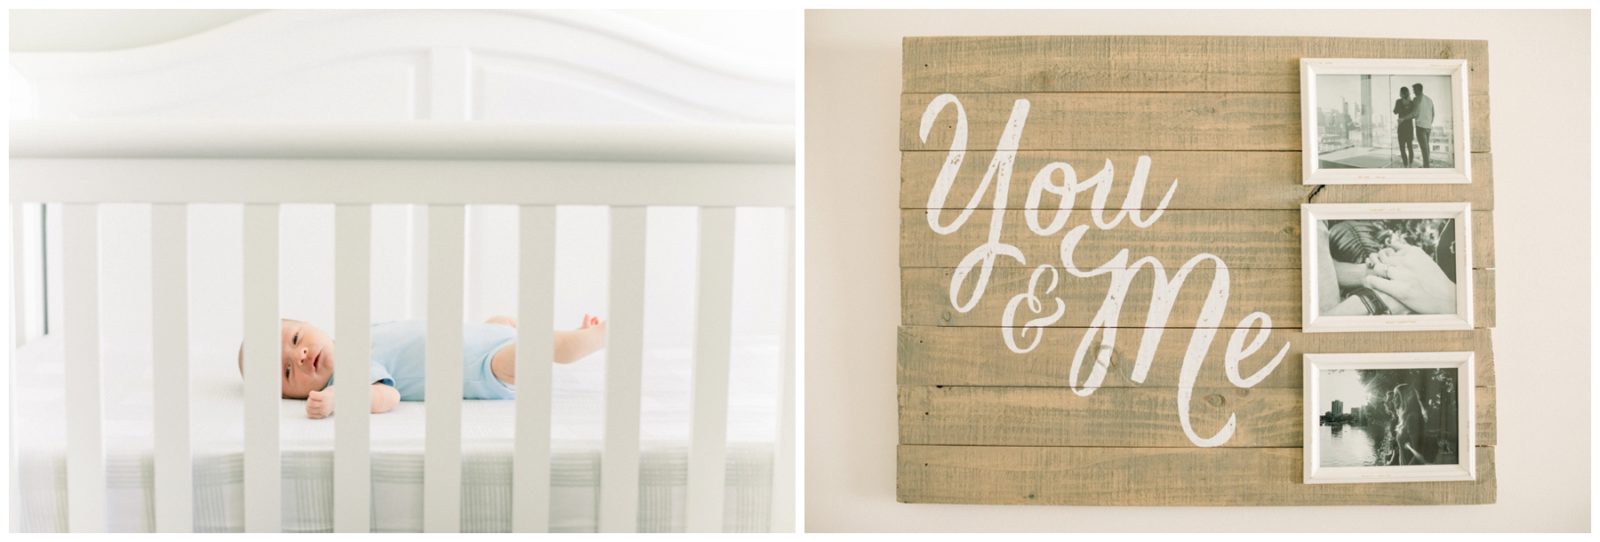 Two pictures. One shows a baby lying on a crib. The other is a wooden frame with a writing and photos.